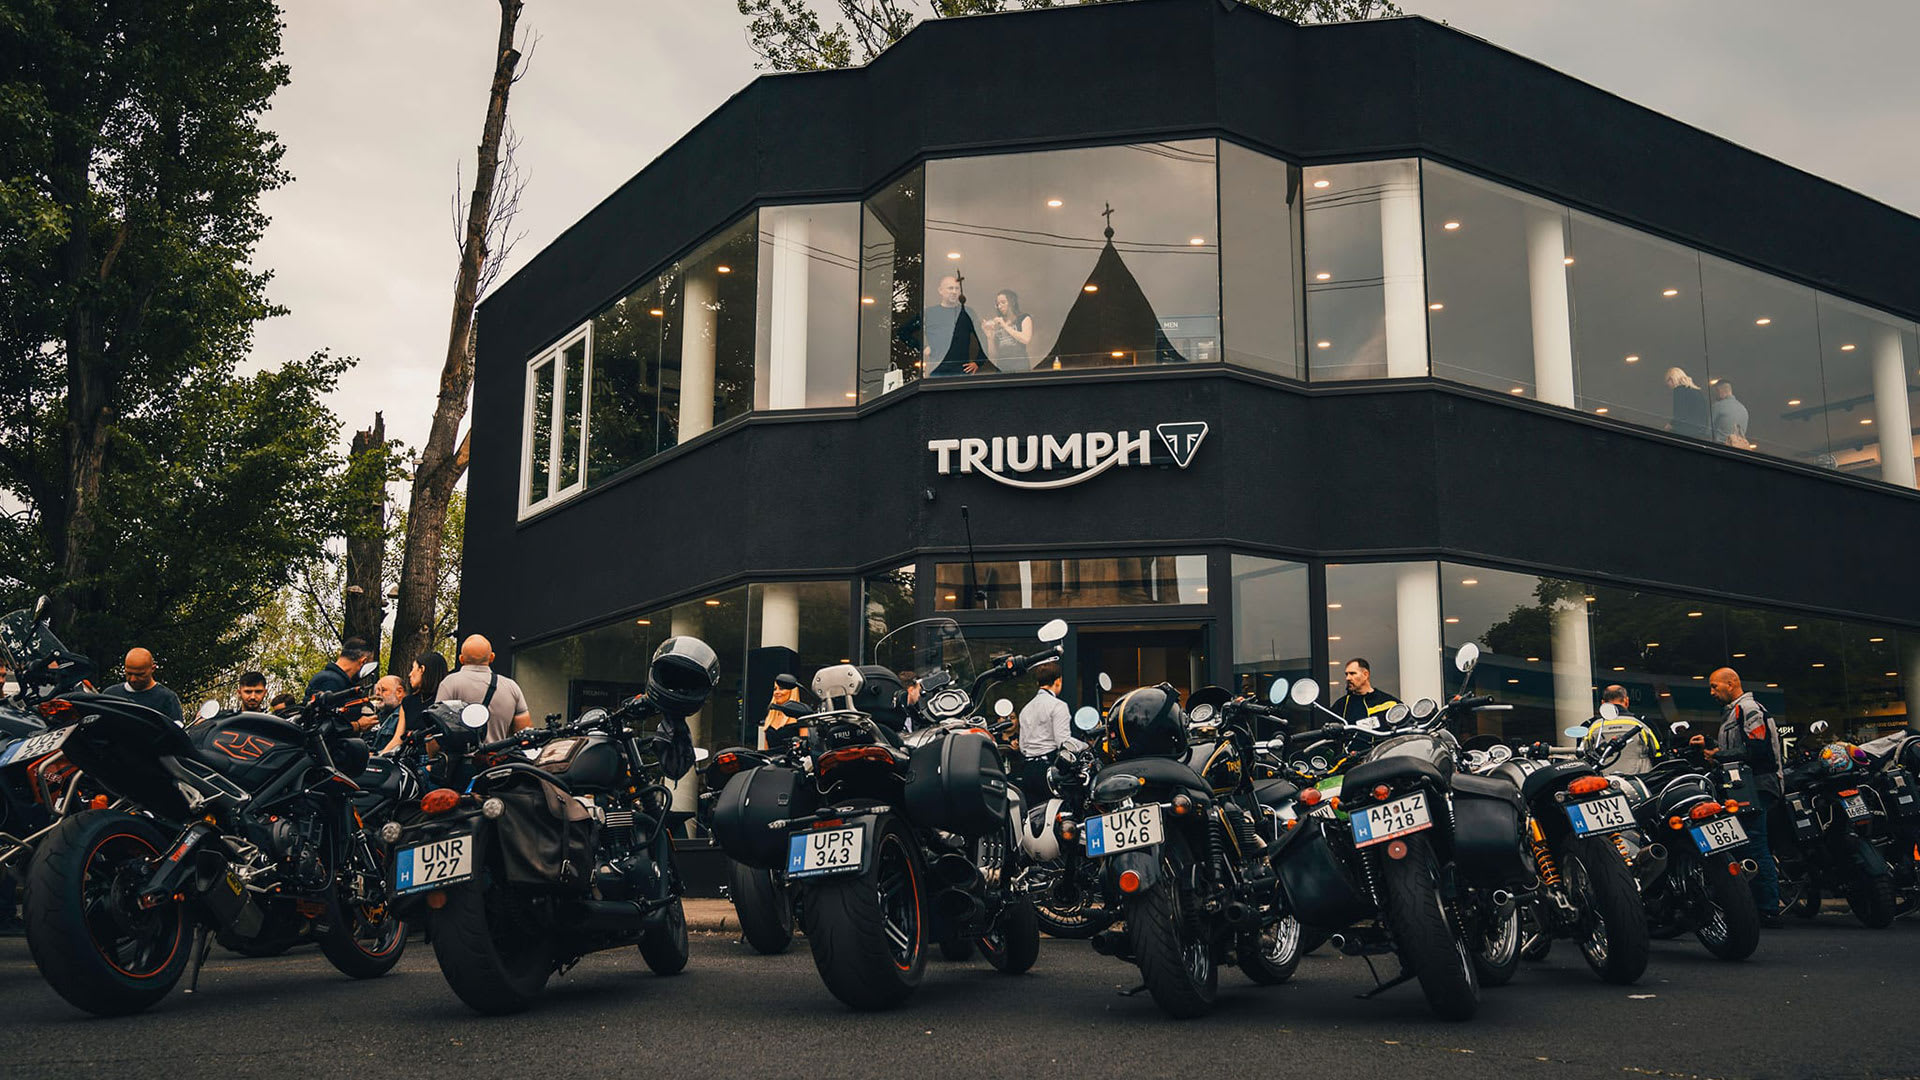 Triumph Budapest Store Front- Hungary